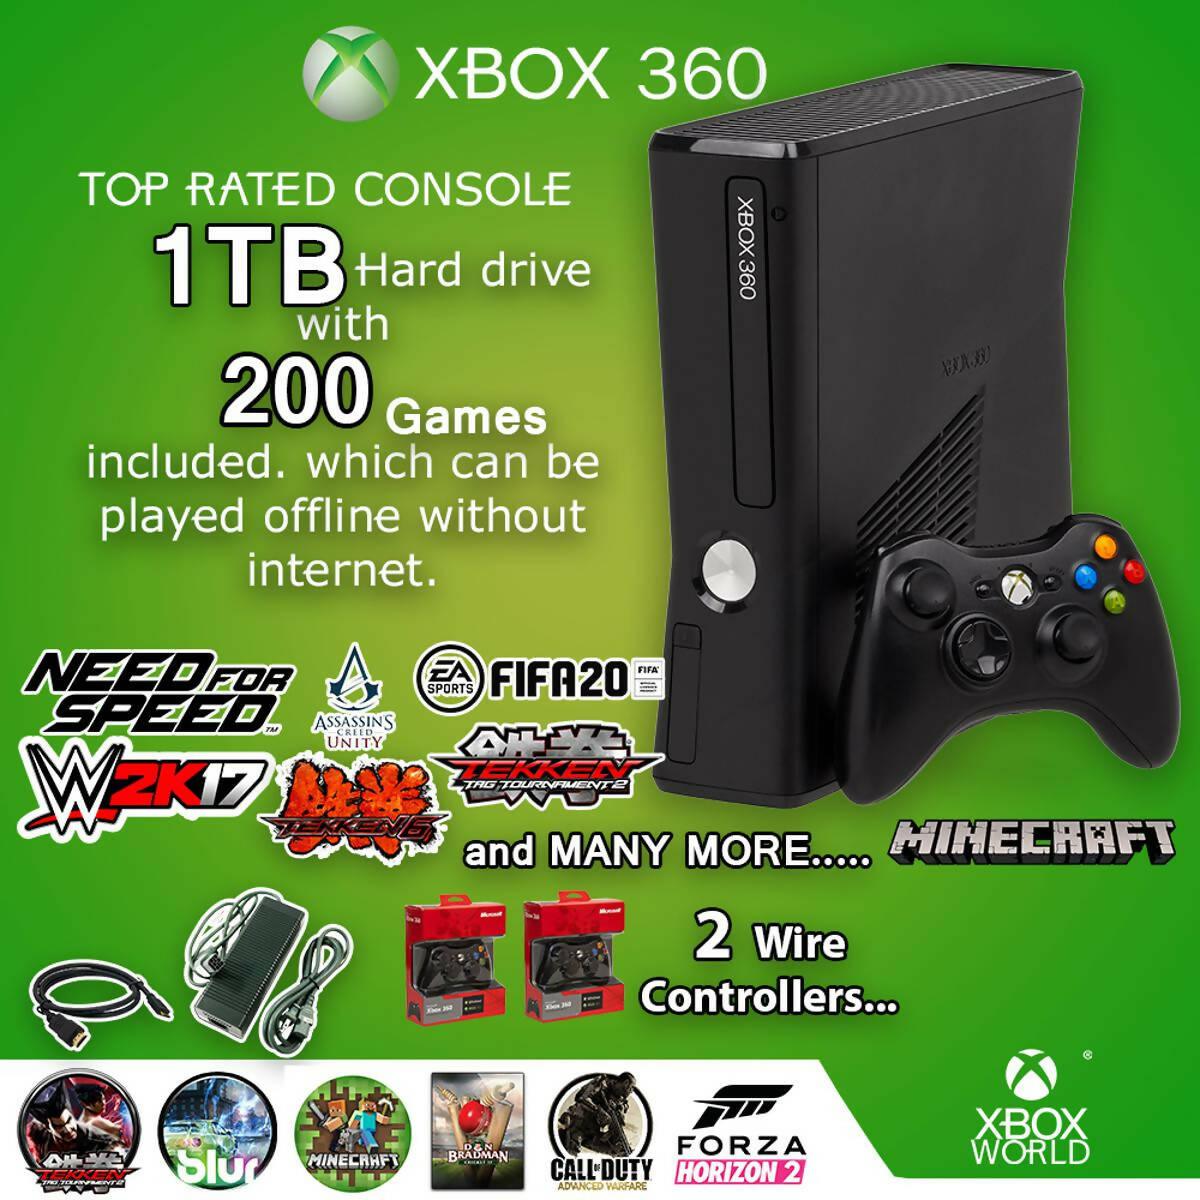 XBOX 360 Slim Black 1TB 200Games Pre Installed | 2 Wires Controllers - ValueBox